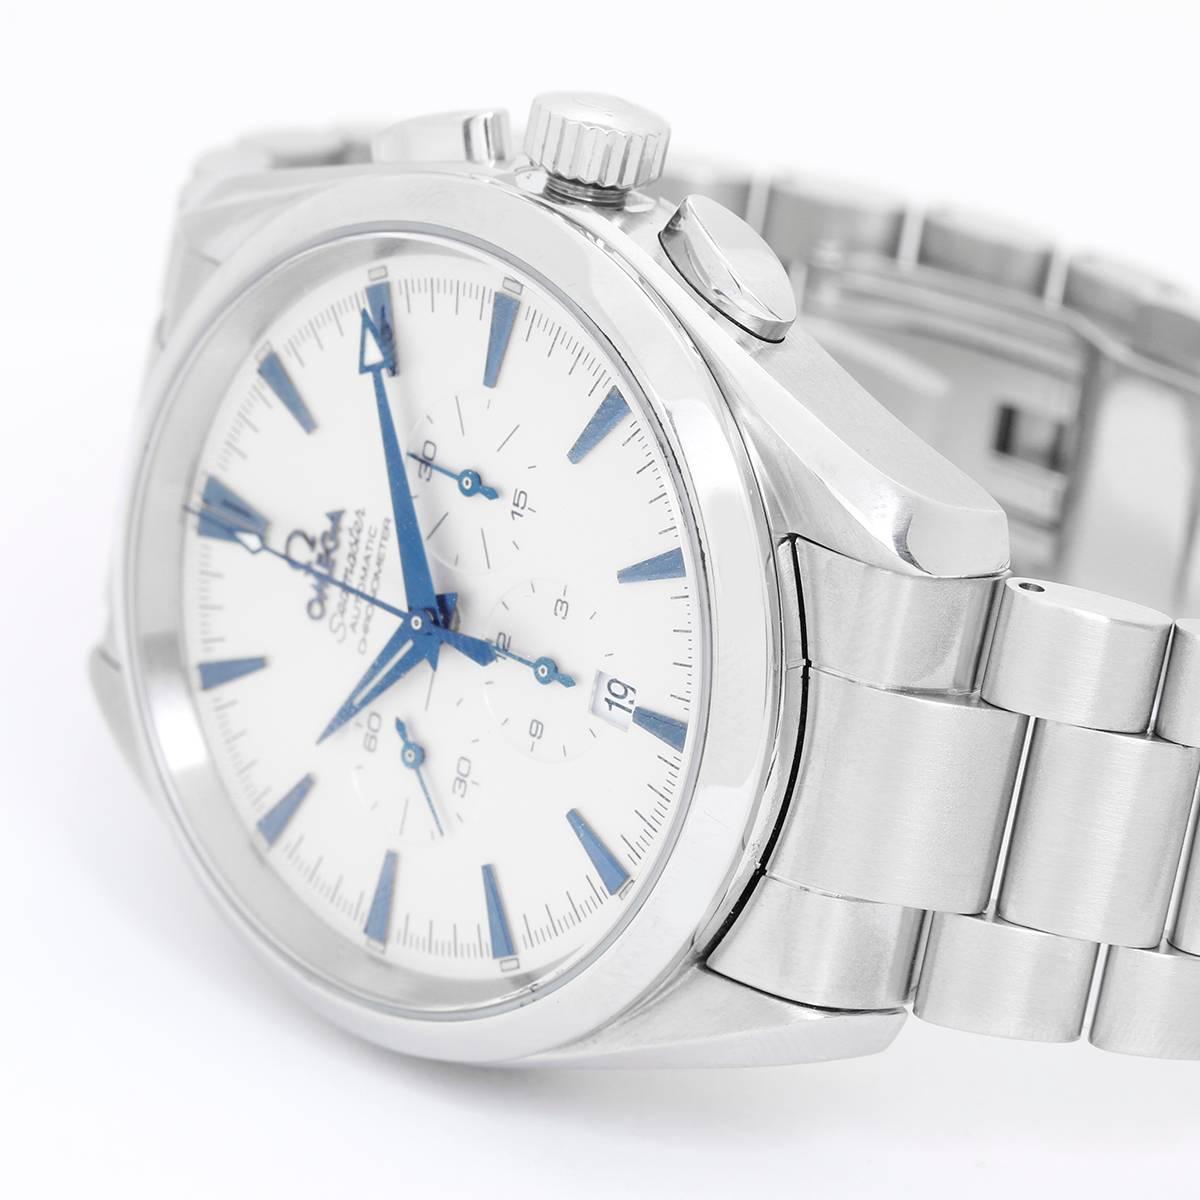 Omega Seamaster Aqua Terra  XL Chronograph Men's Steel Watch 2512.30.00 -  Automatic winding. Stainless steel case with smooth bezel and exposition back (42mm diameter). Silver dial with date at 6 o'clock and blue hands and markers. Stainless steel